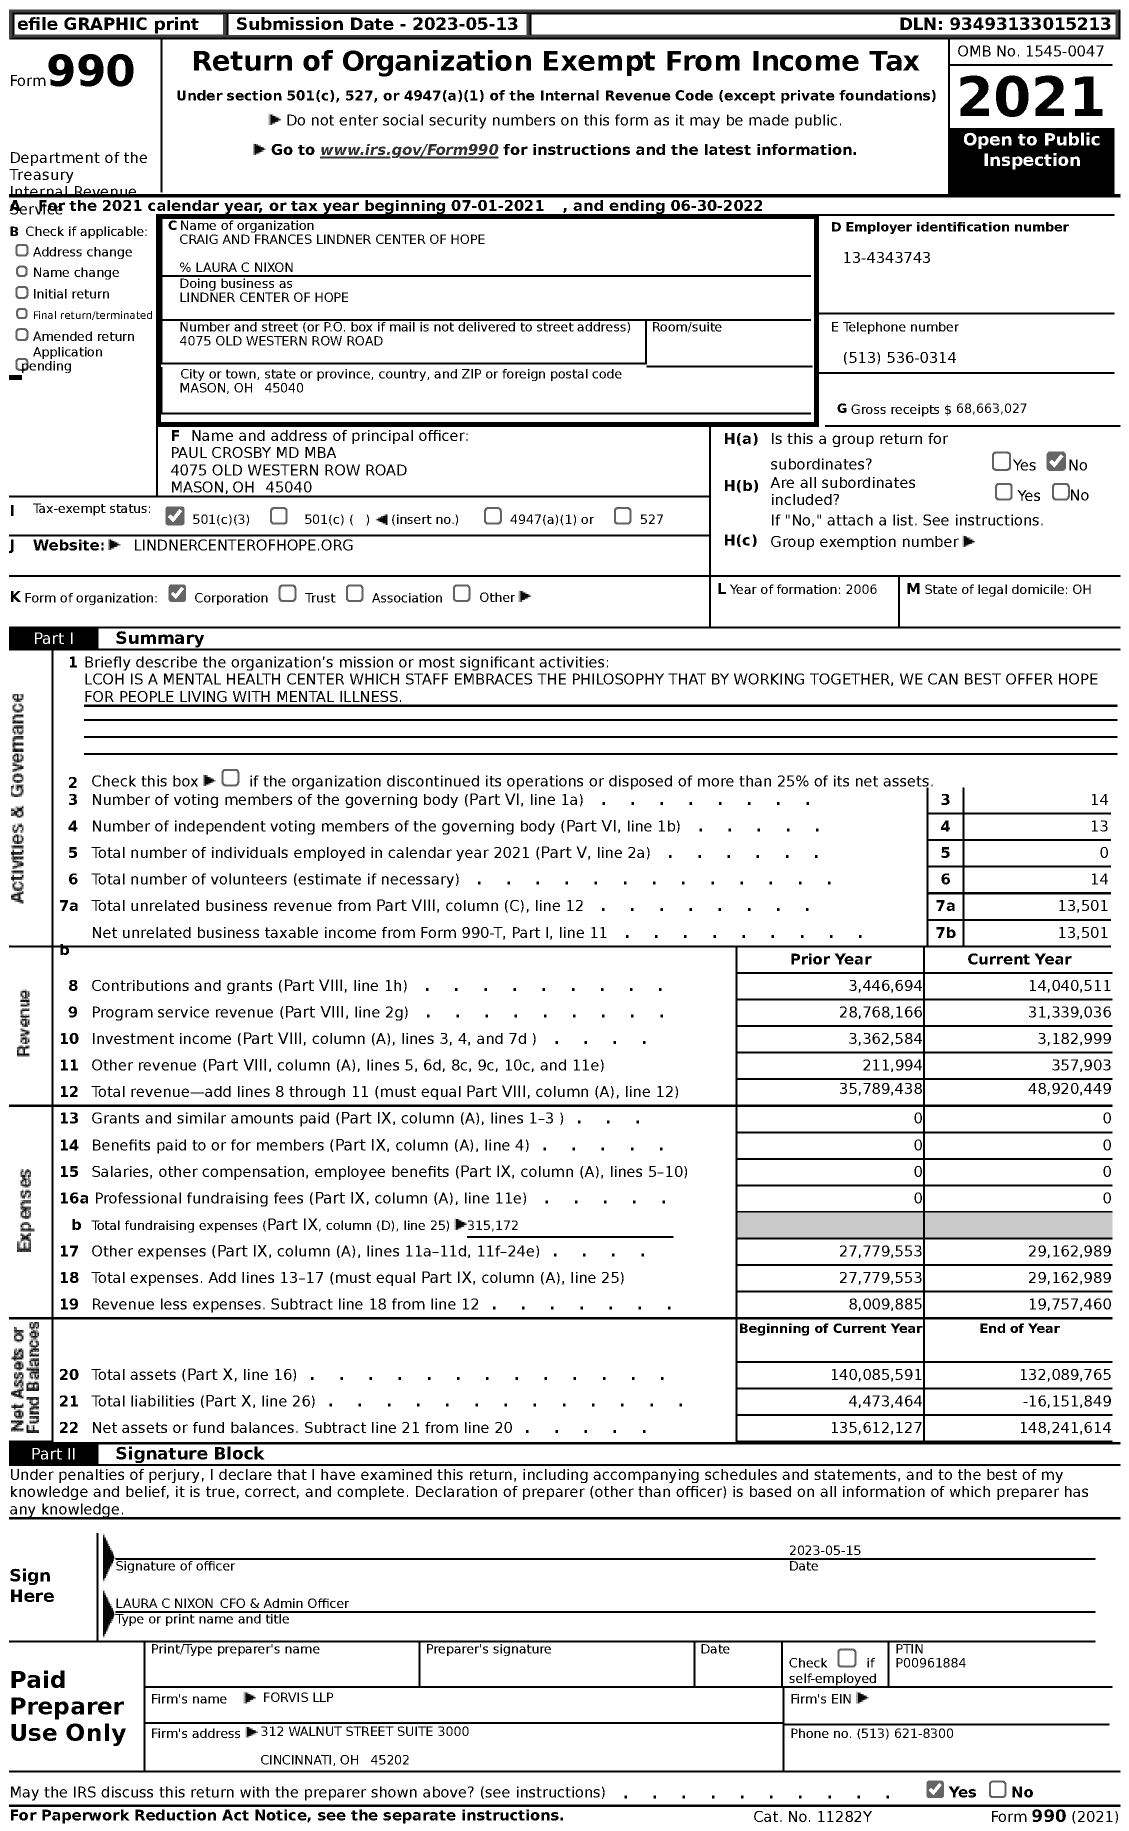 Image of first page of 2021 Form 990 for CRAIG AND Frances Lindner CENTER OF HOPE